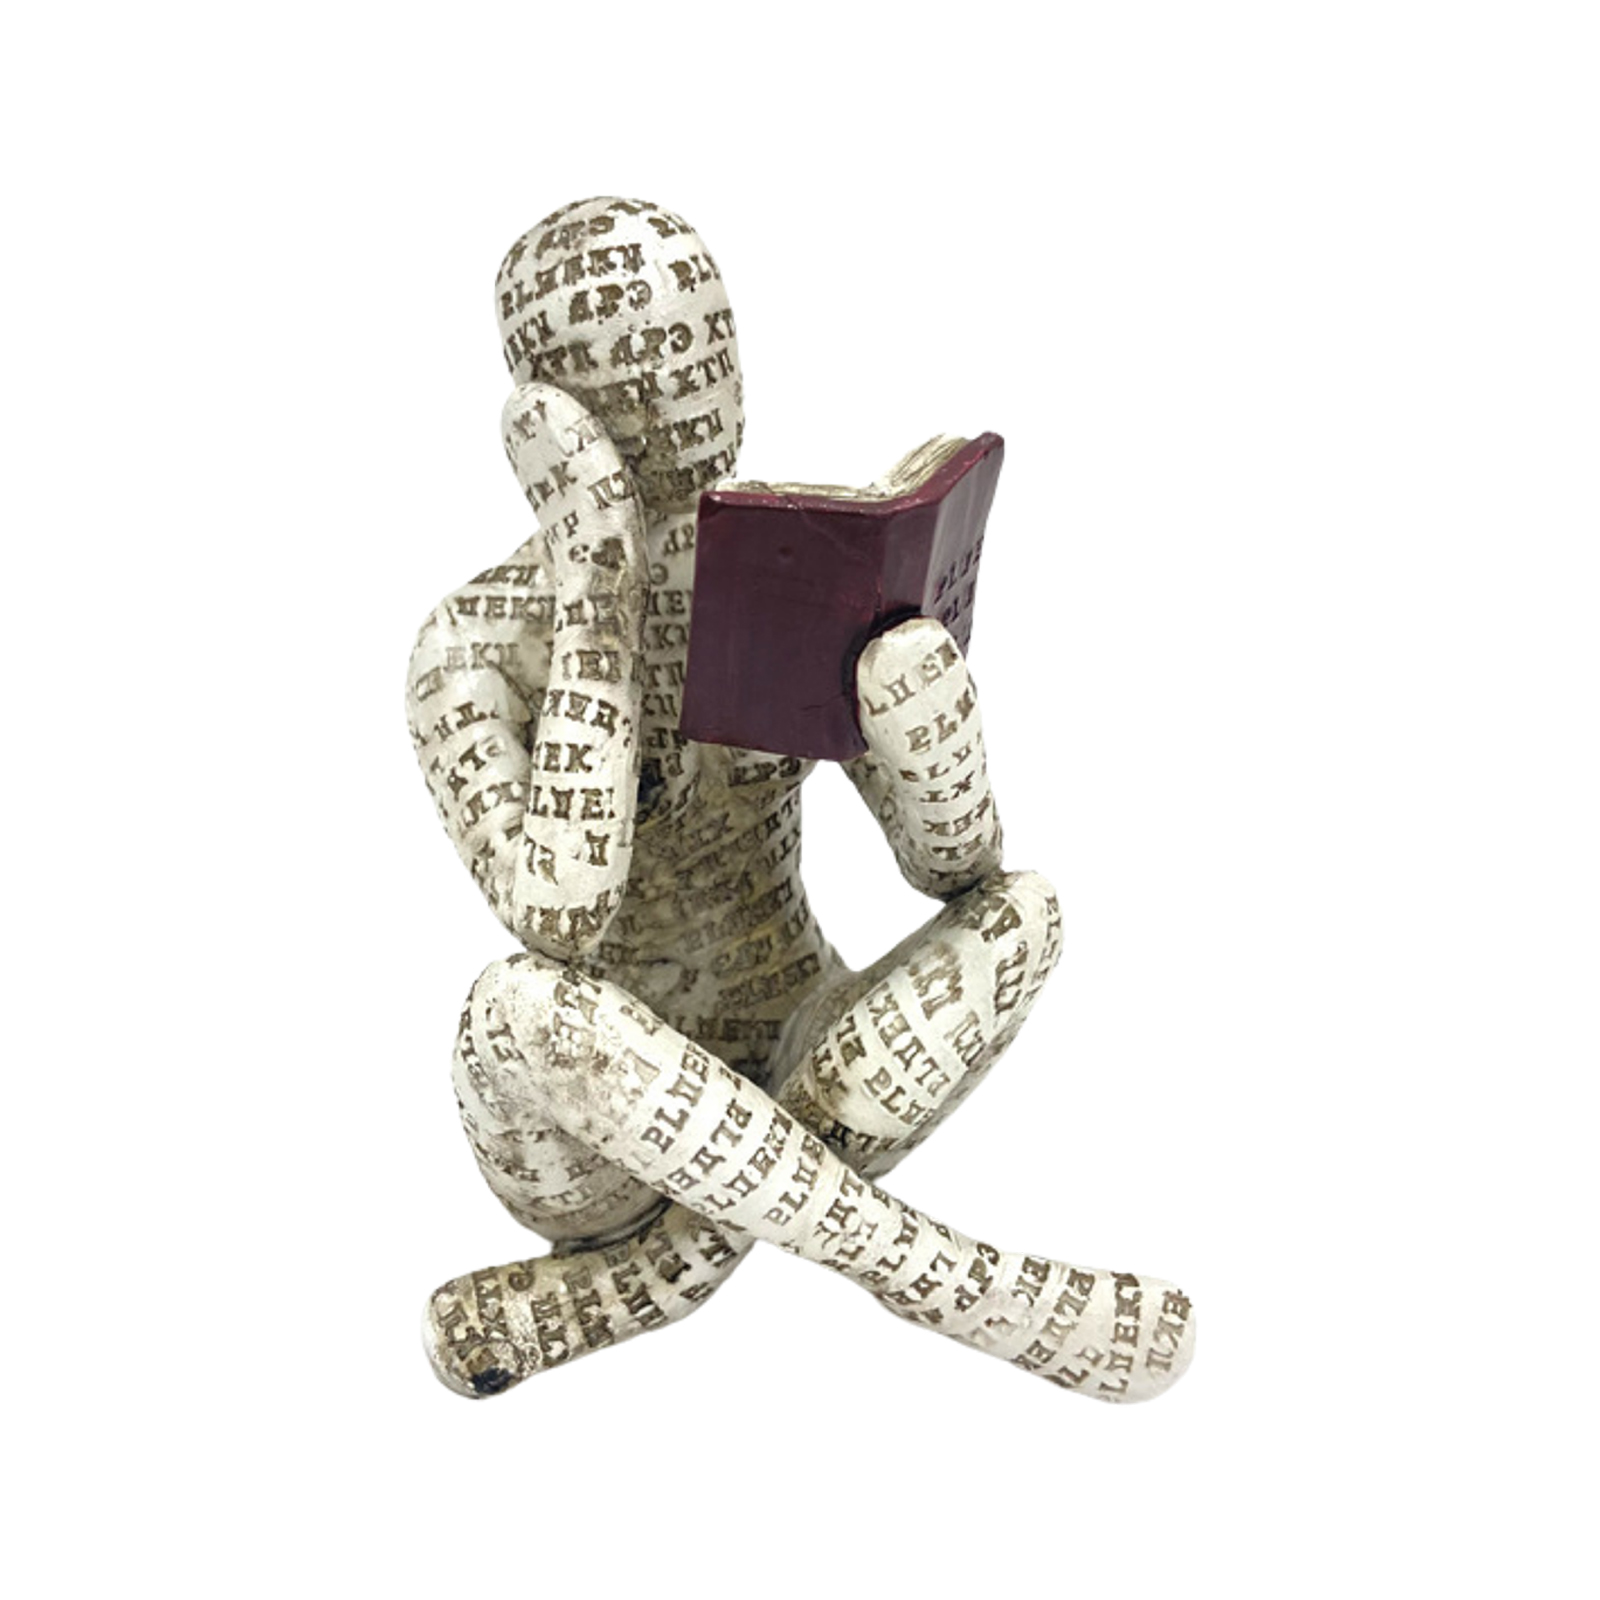 Abstract Thinking Figure for Modern Home Decor